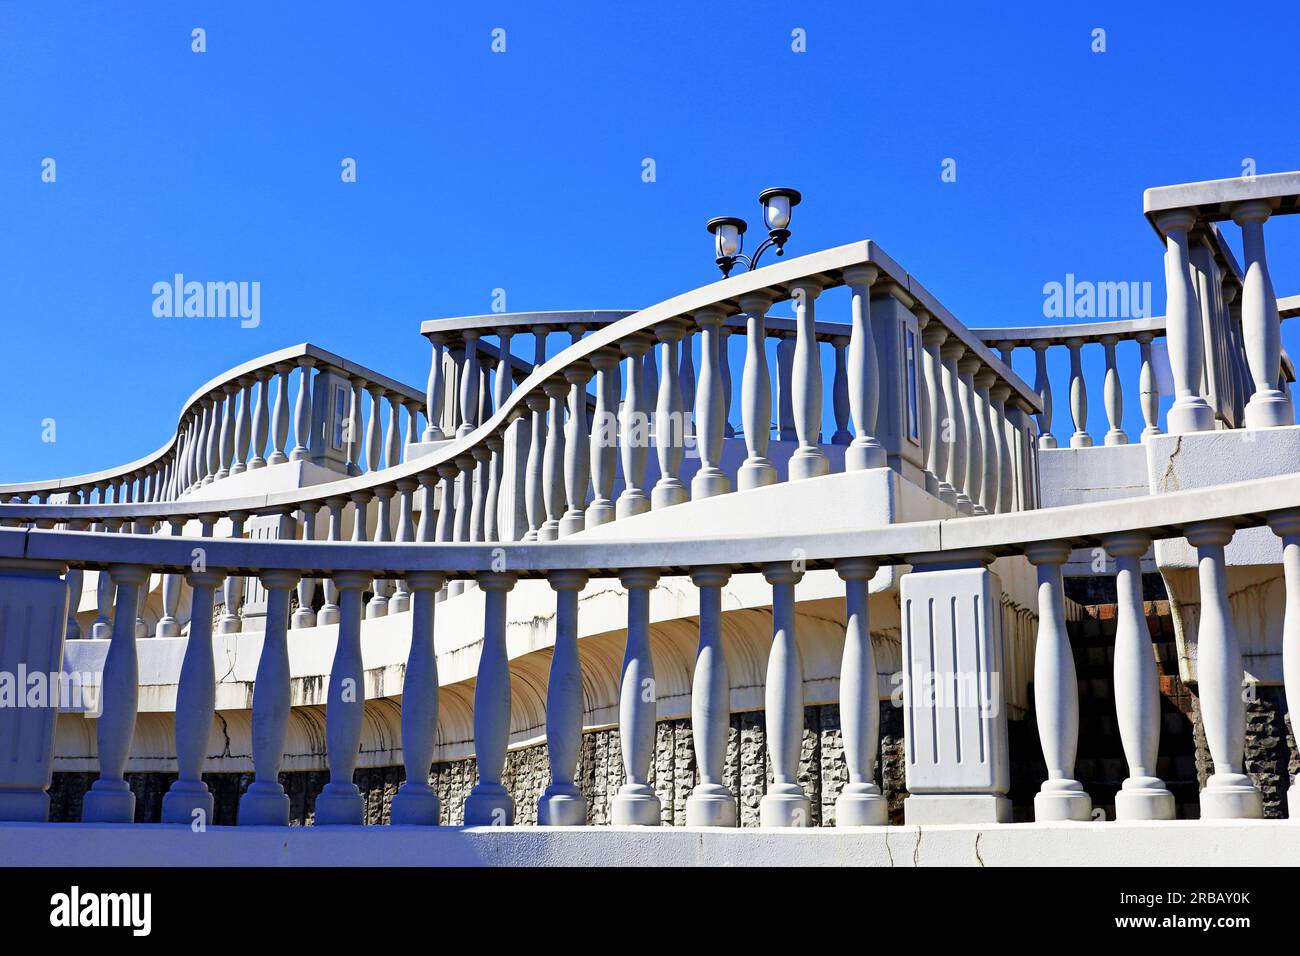 A European-style white balcony connecting the Sky Deck and the Rainbow Deck on the coast of Atami Stock Photo